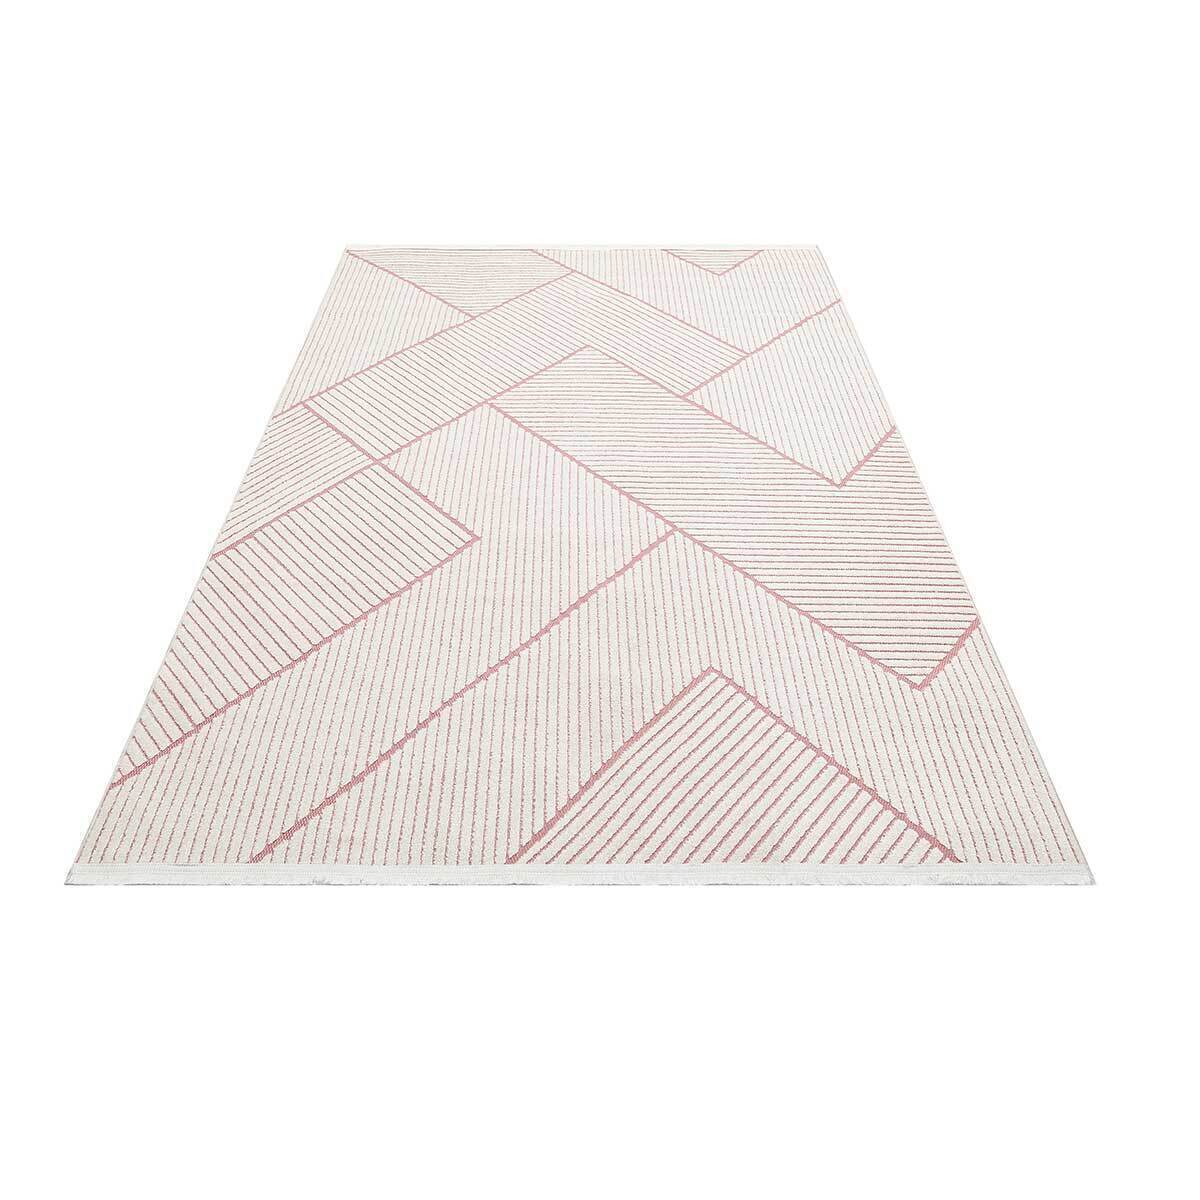 Jazz - Geometric Rose Indoor and Outdoor Rug - 290cm x 190cm product image